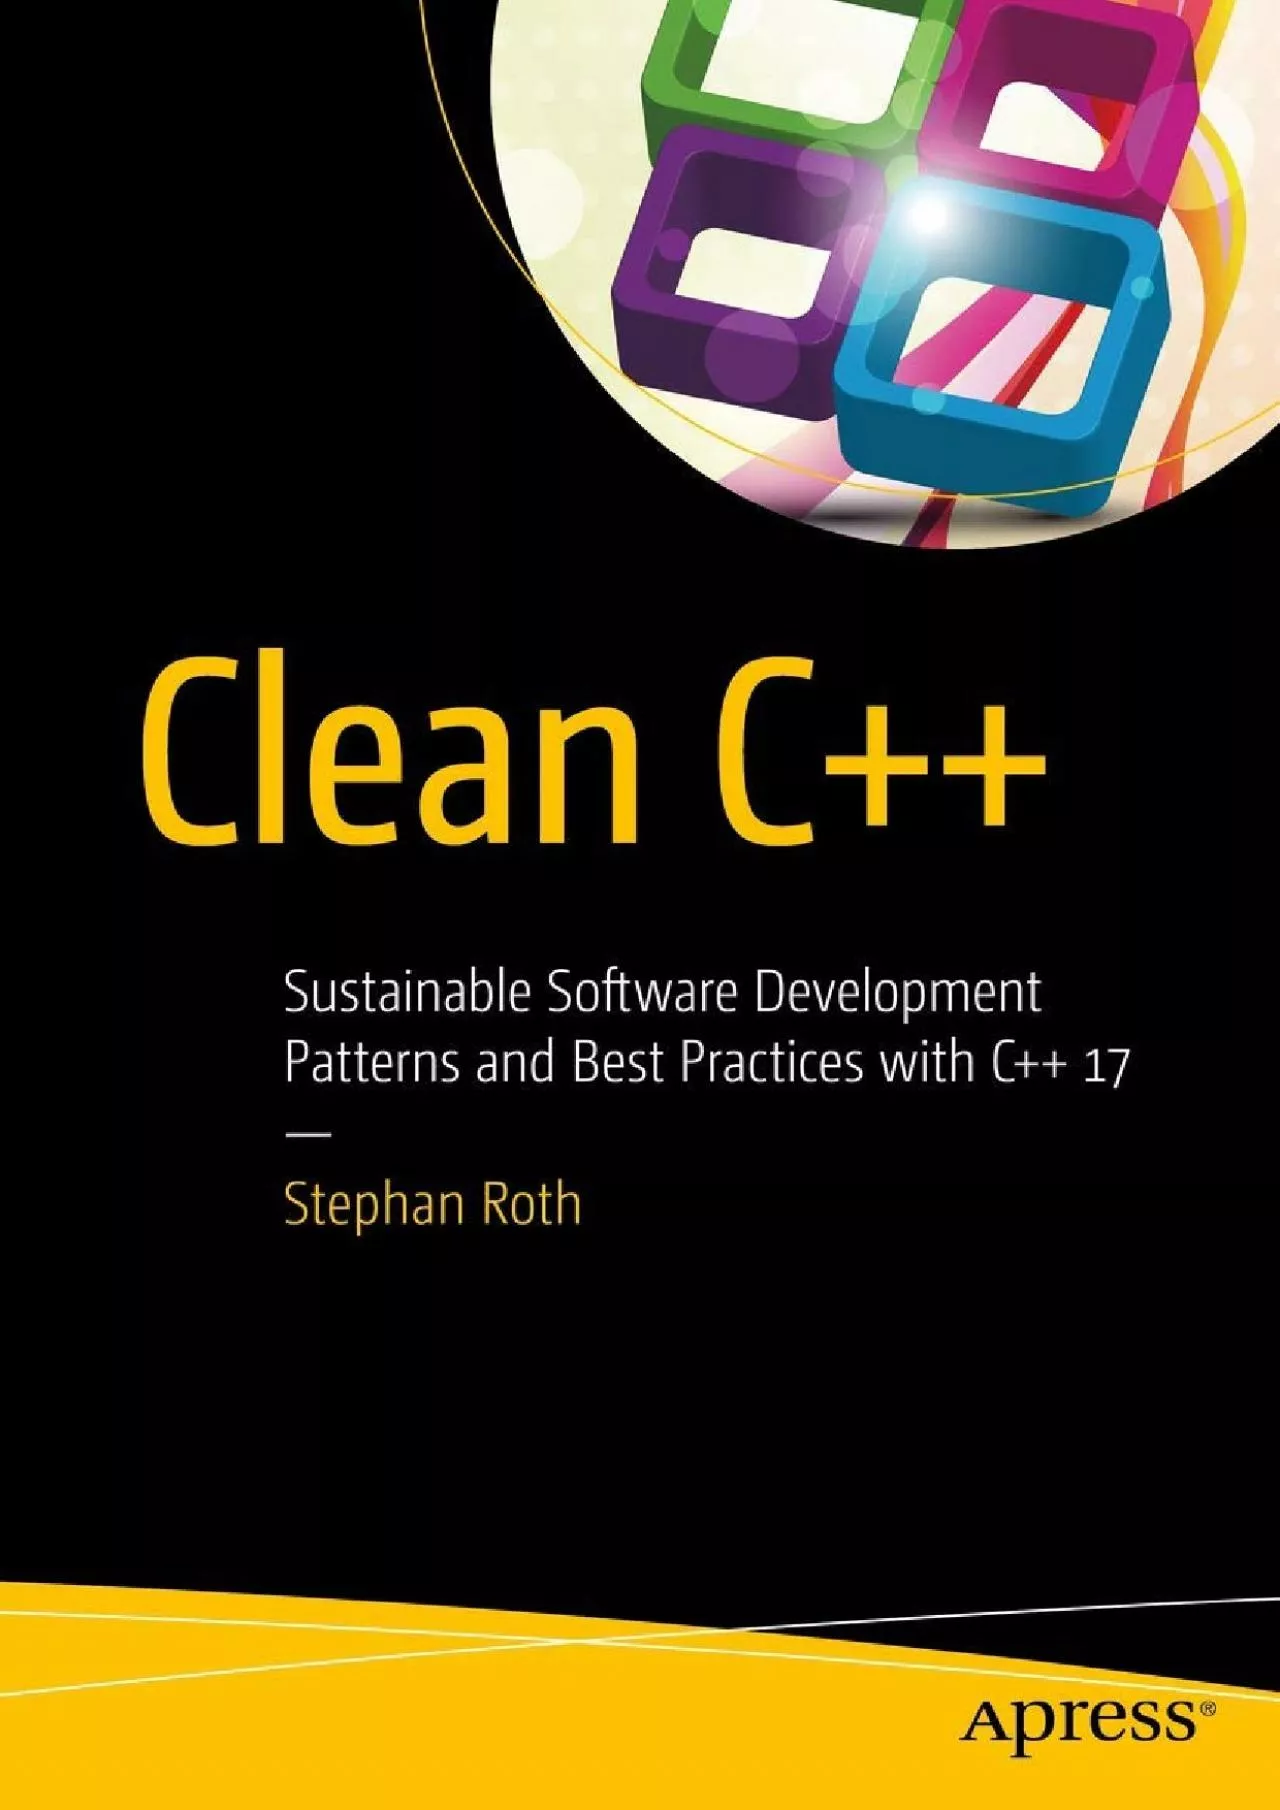 [BEST]-Clean C++: Sustainable Software Development Patterns and Best Practices with C++